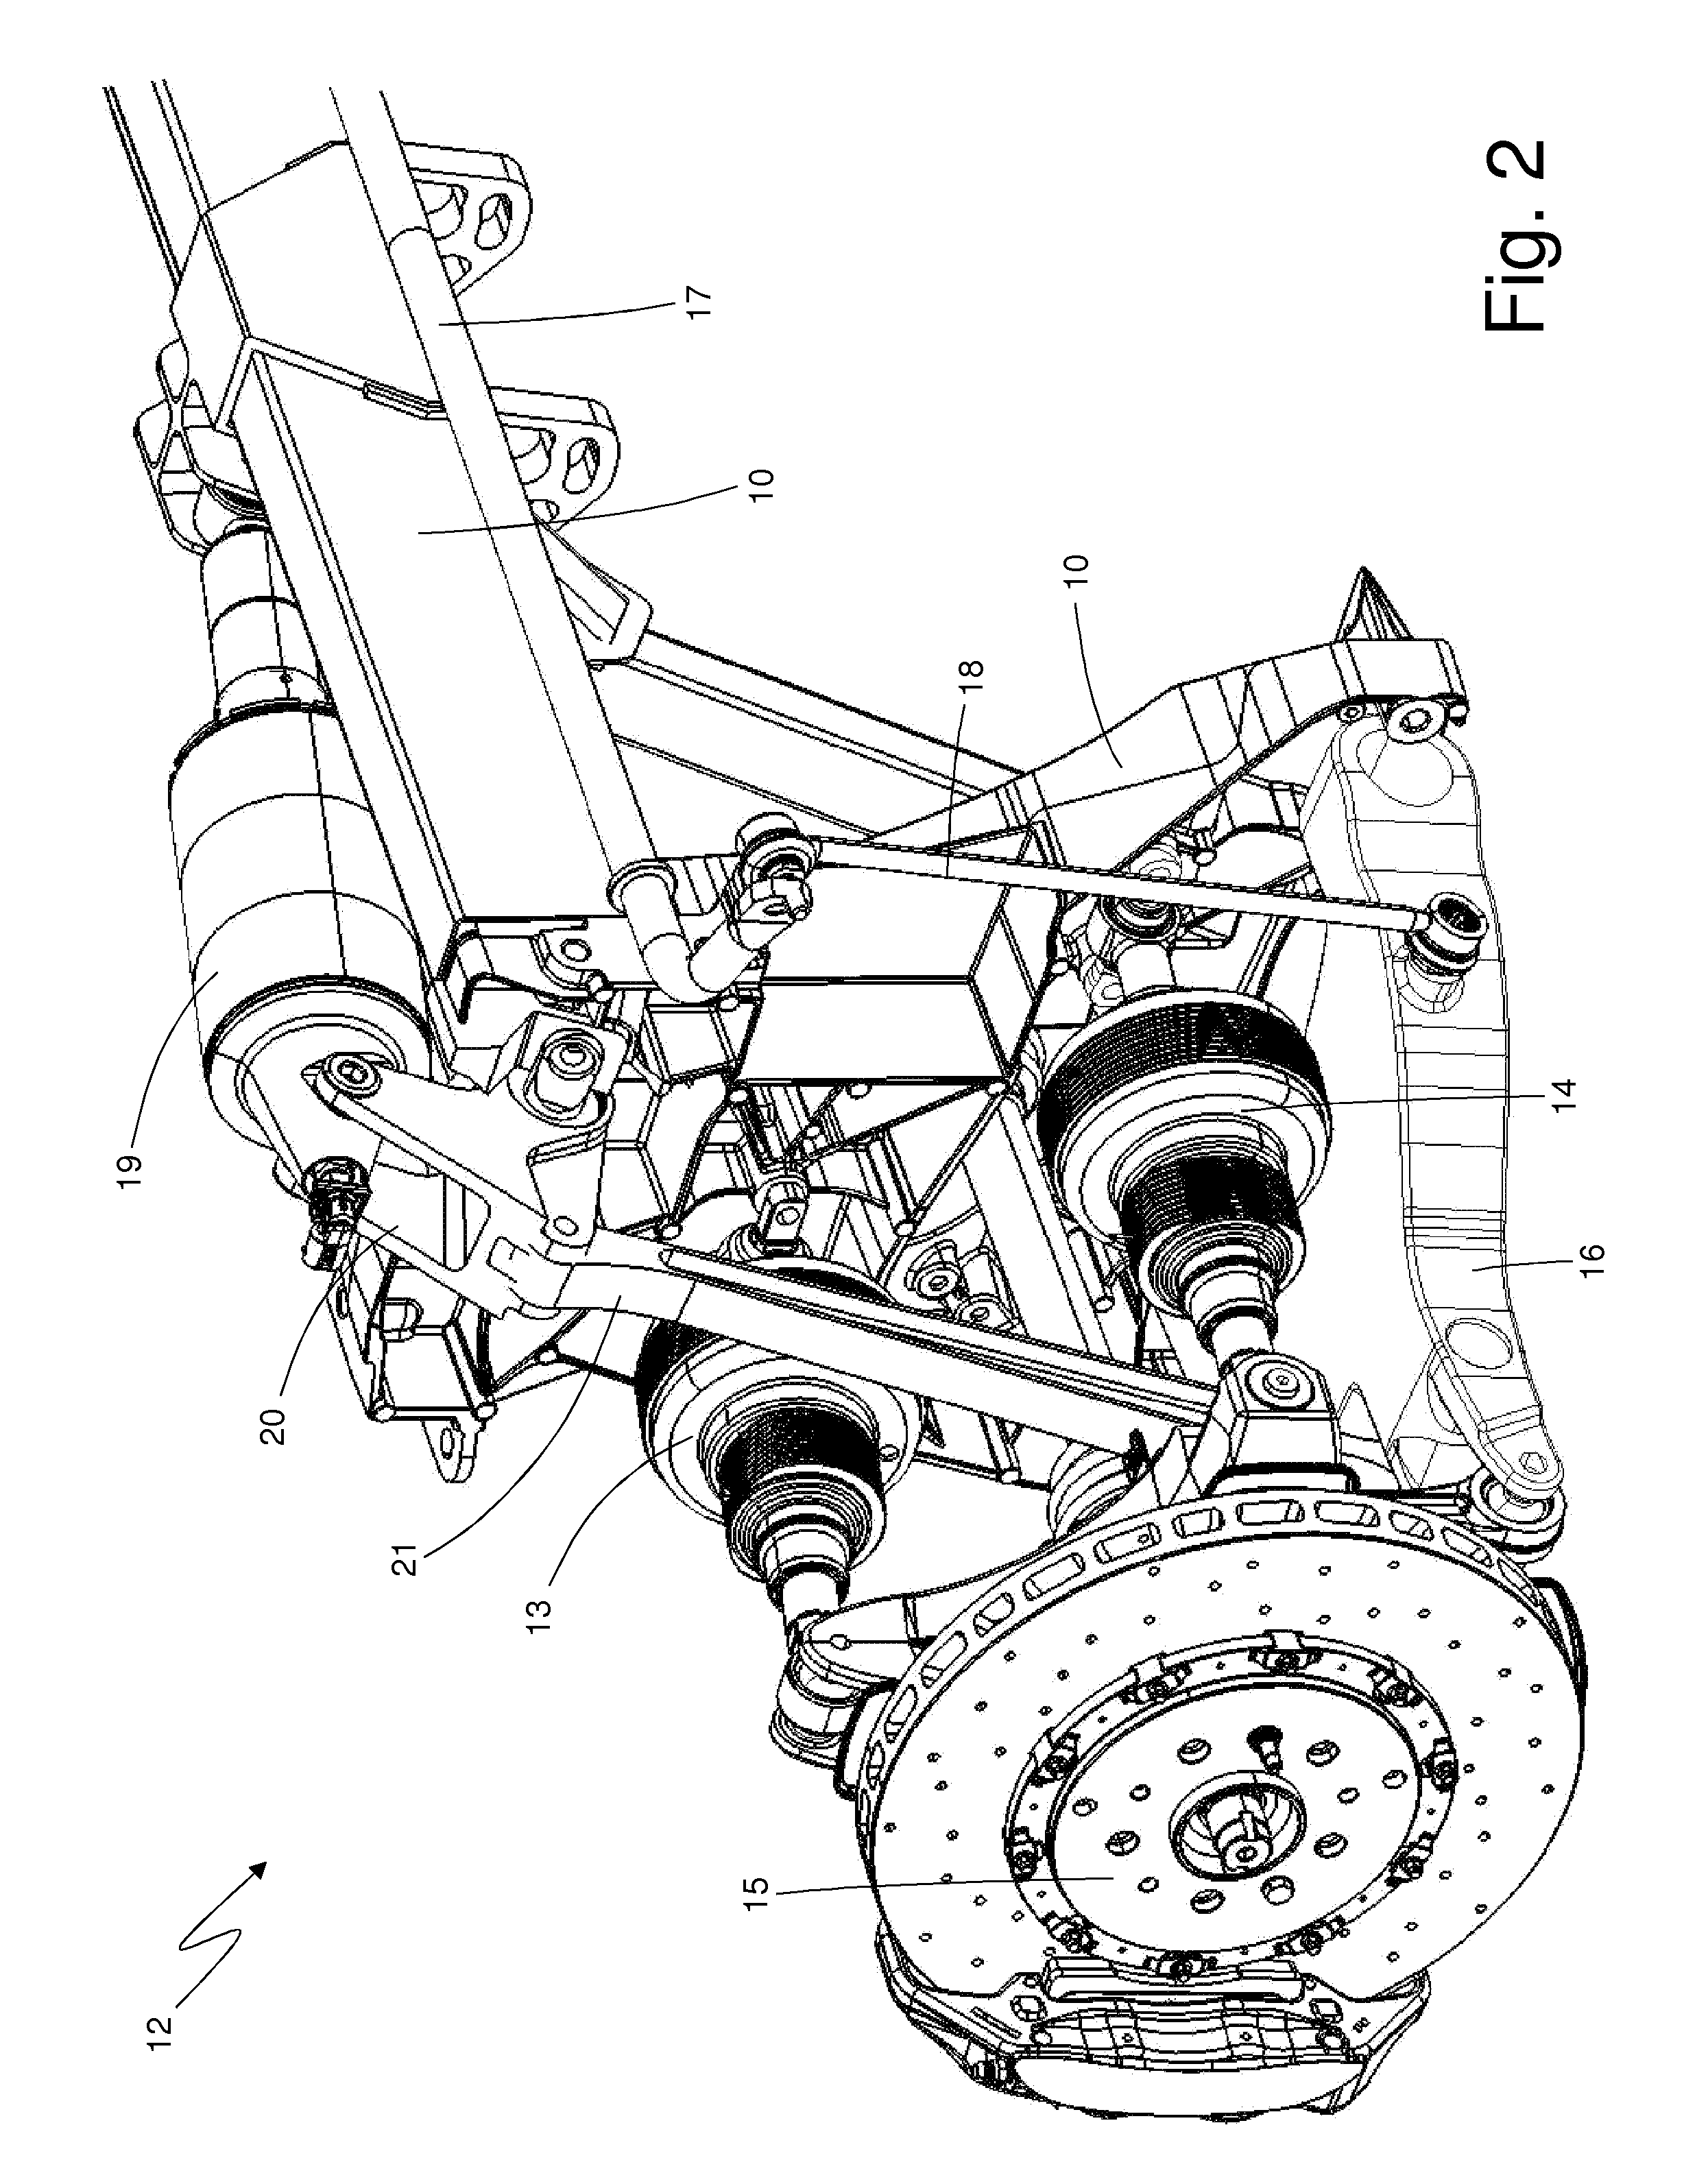 Method to control toe angle and camber angle in active rear suspensions of cars